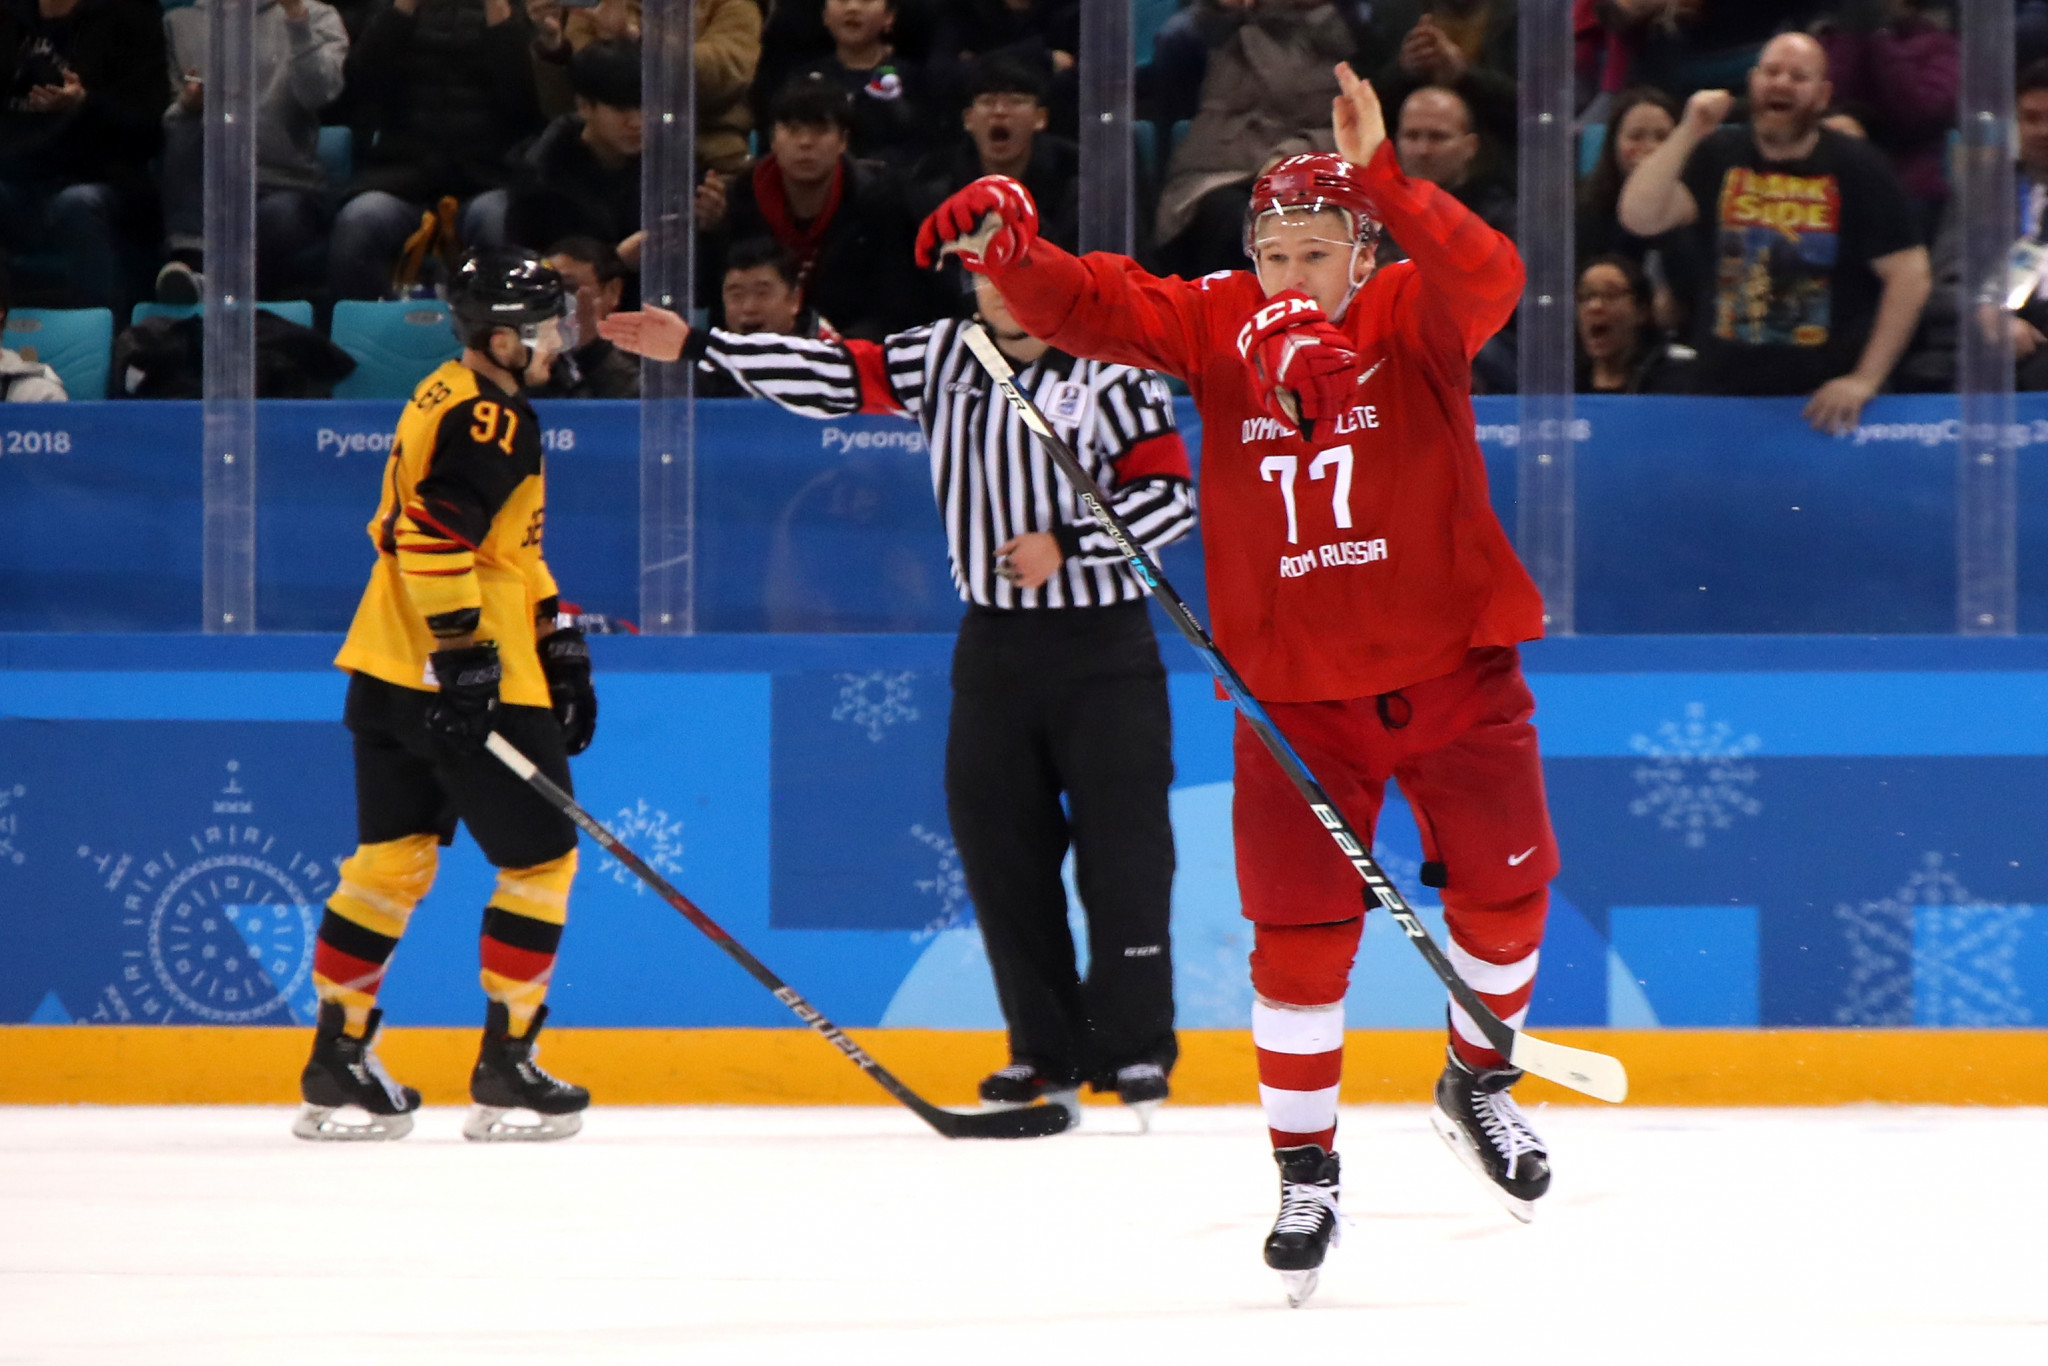 Kirill Kaprizov scored an overtime winner as the Olympic Athletes from Russia claimed victory over Germany in the men's ice hockey final here at Pyeongchang 2018 ©Getty Images